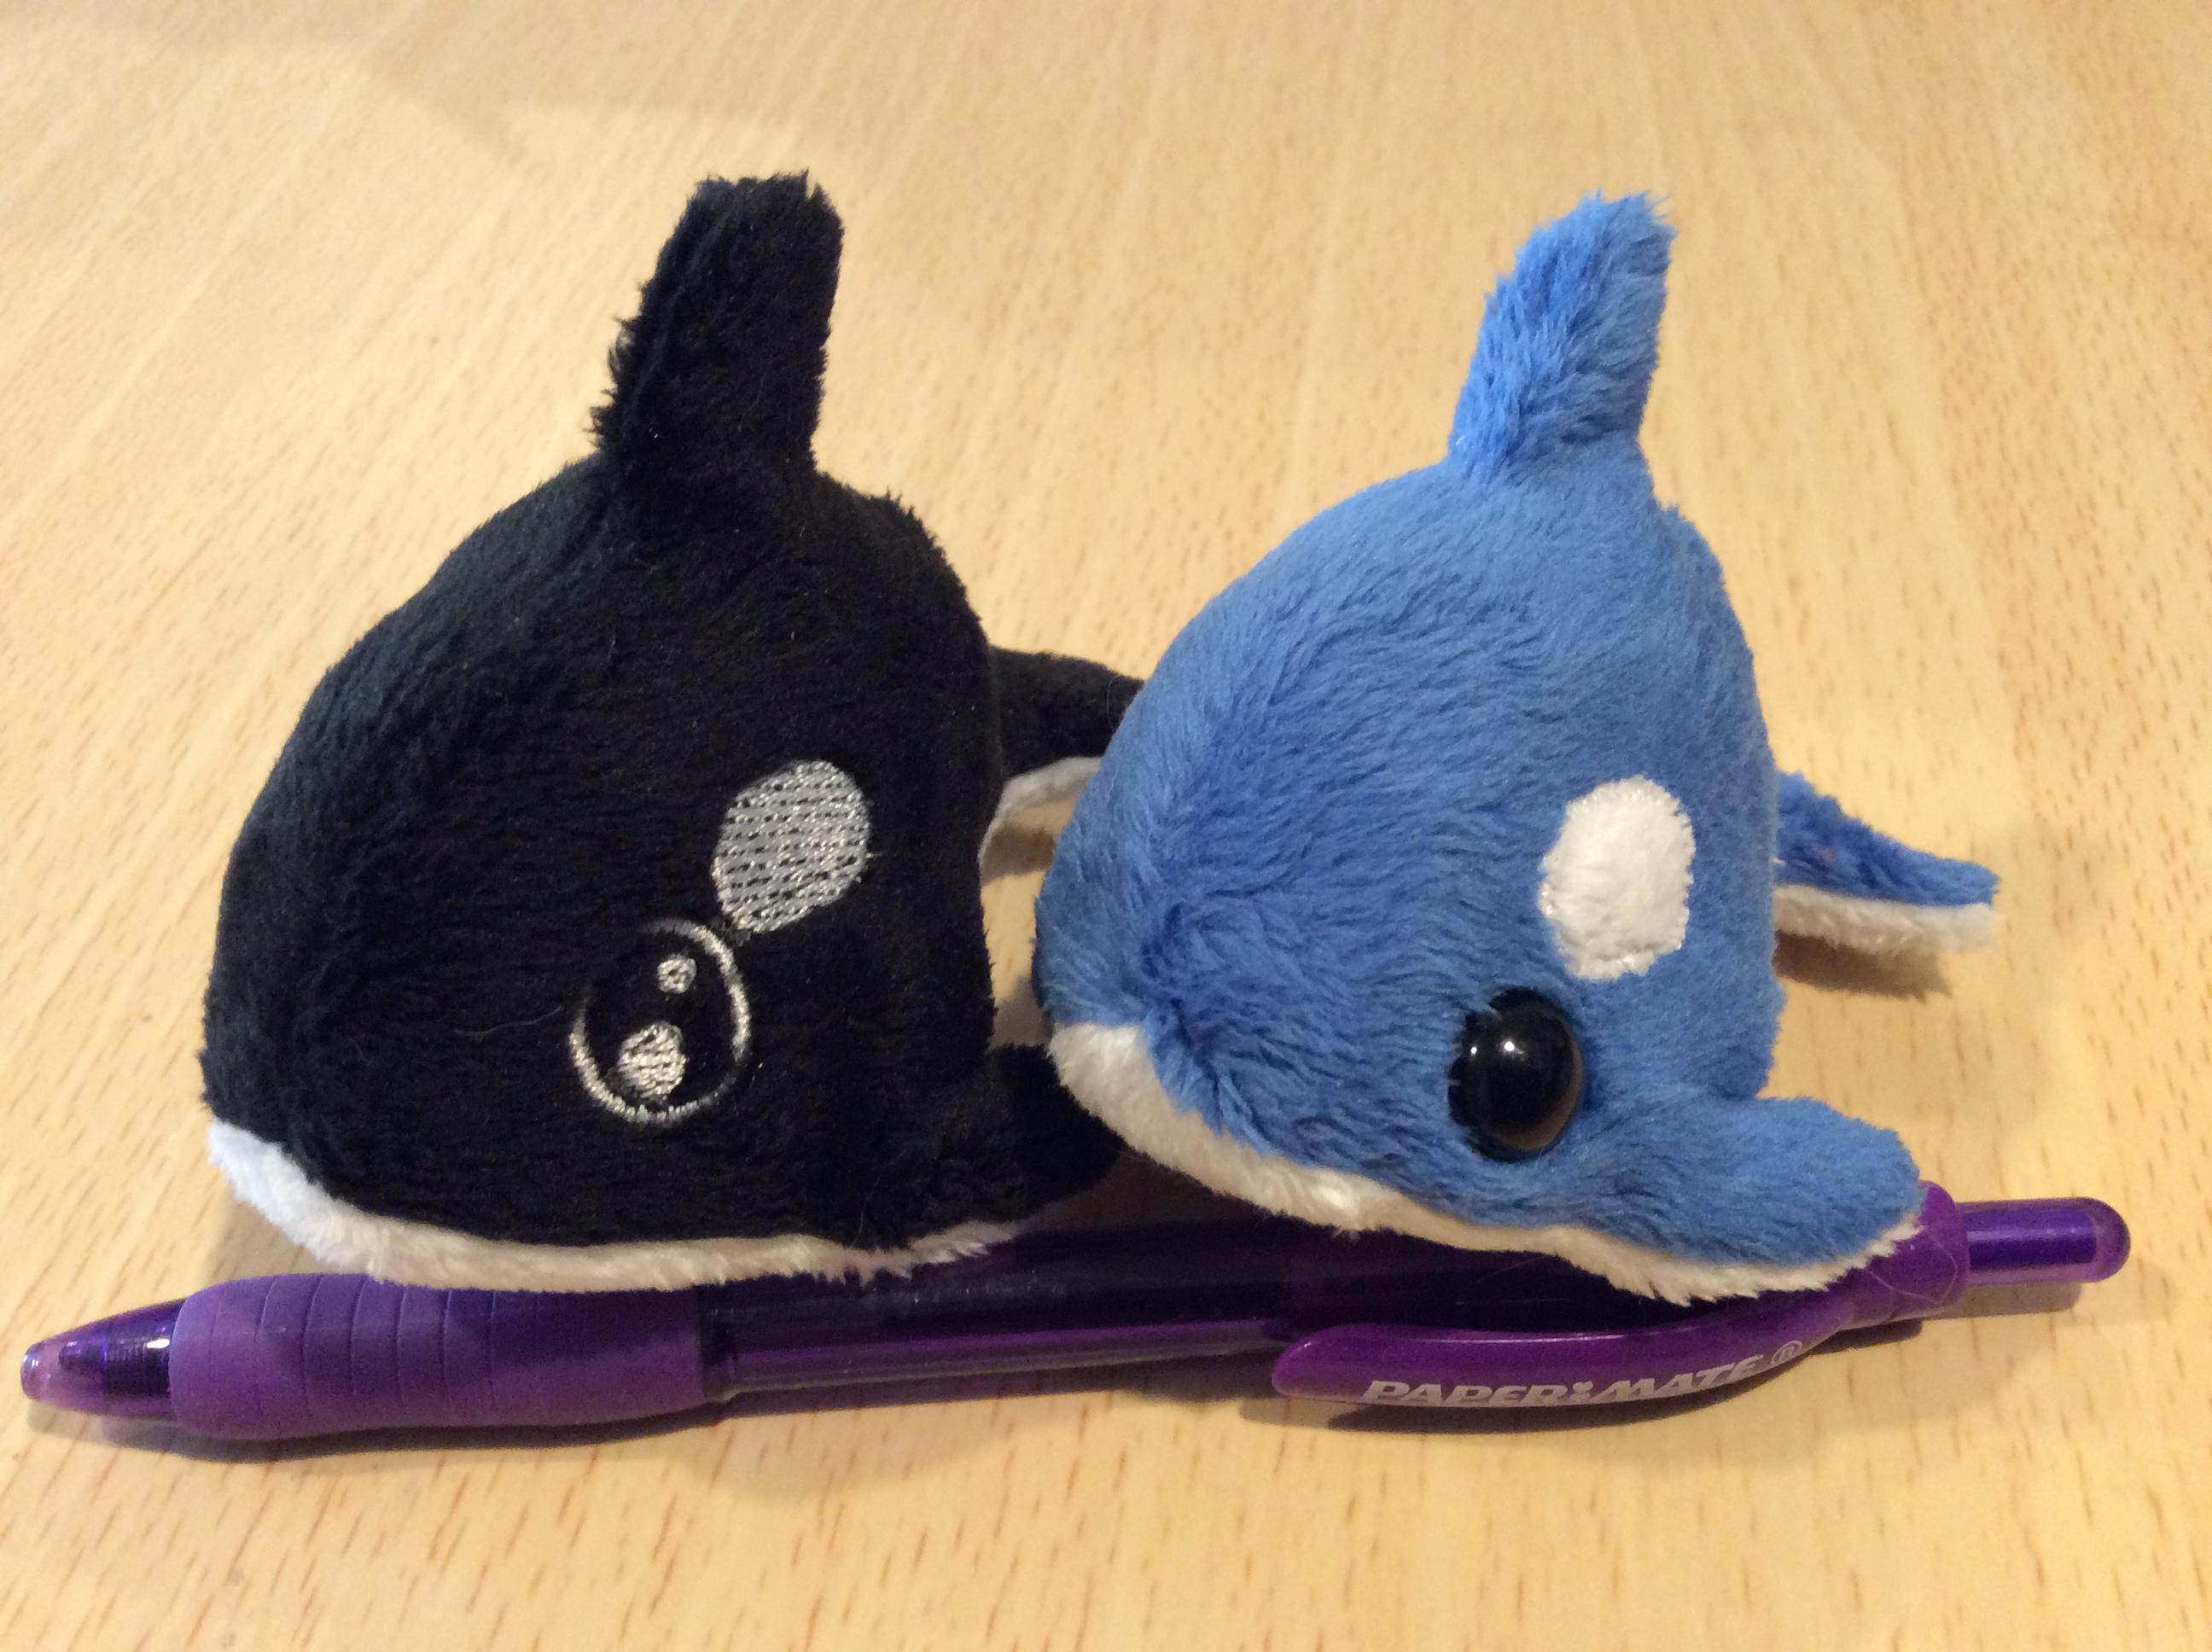 A pair of tiny plush killer whales, with a pen for scale.